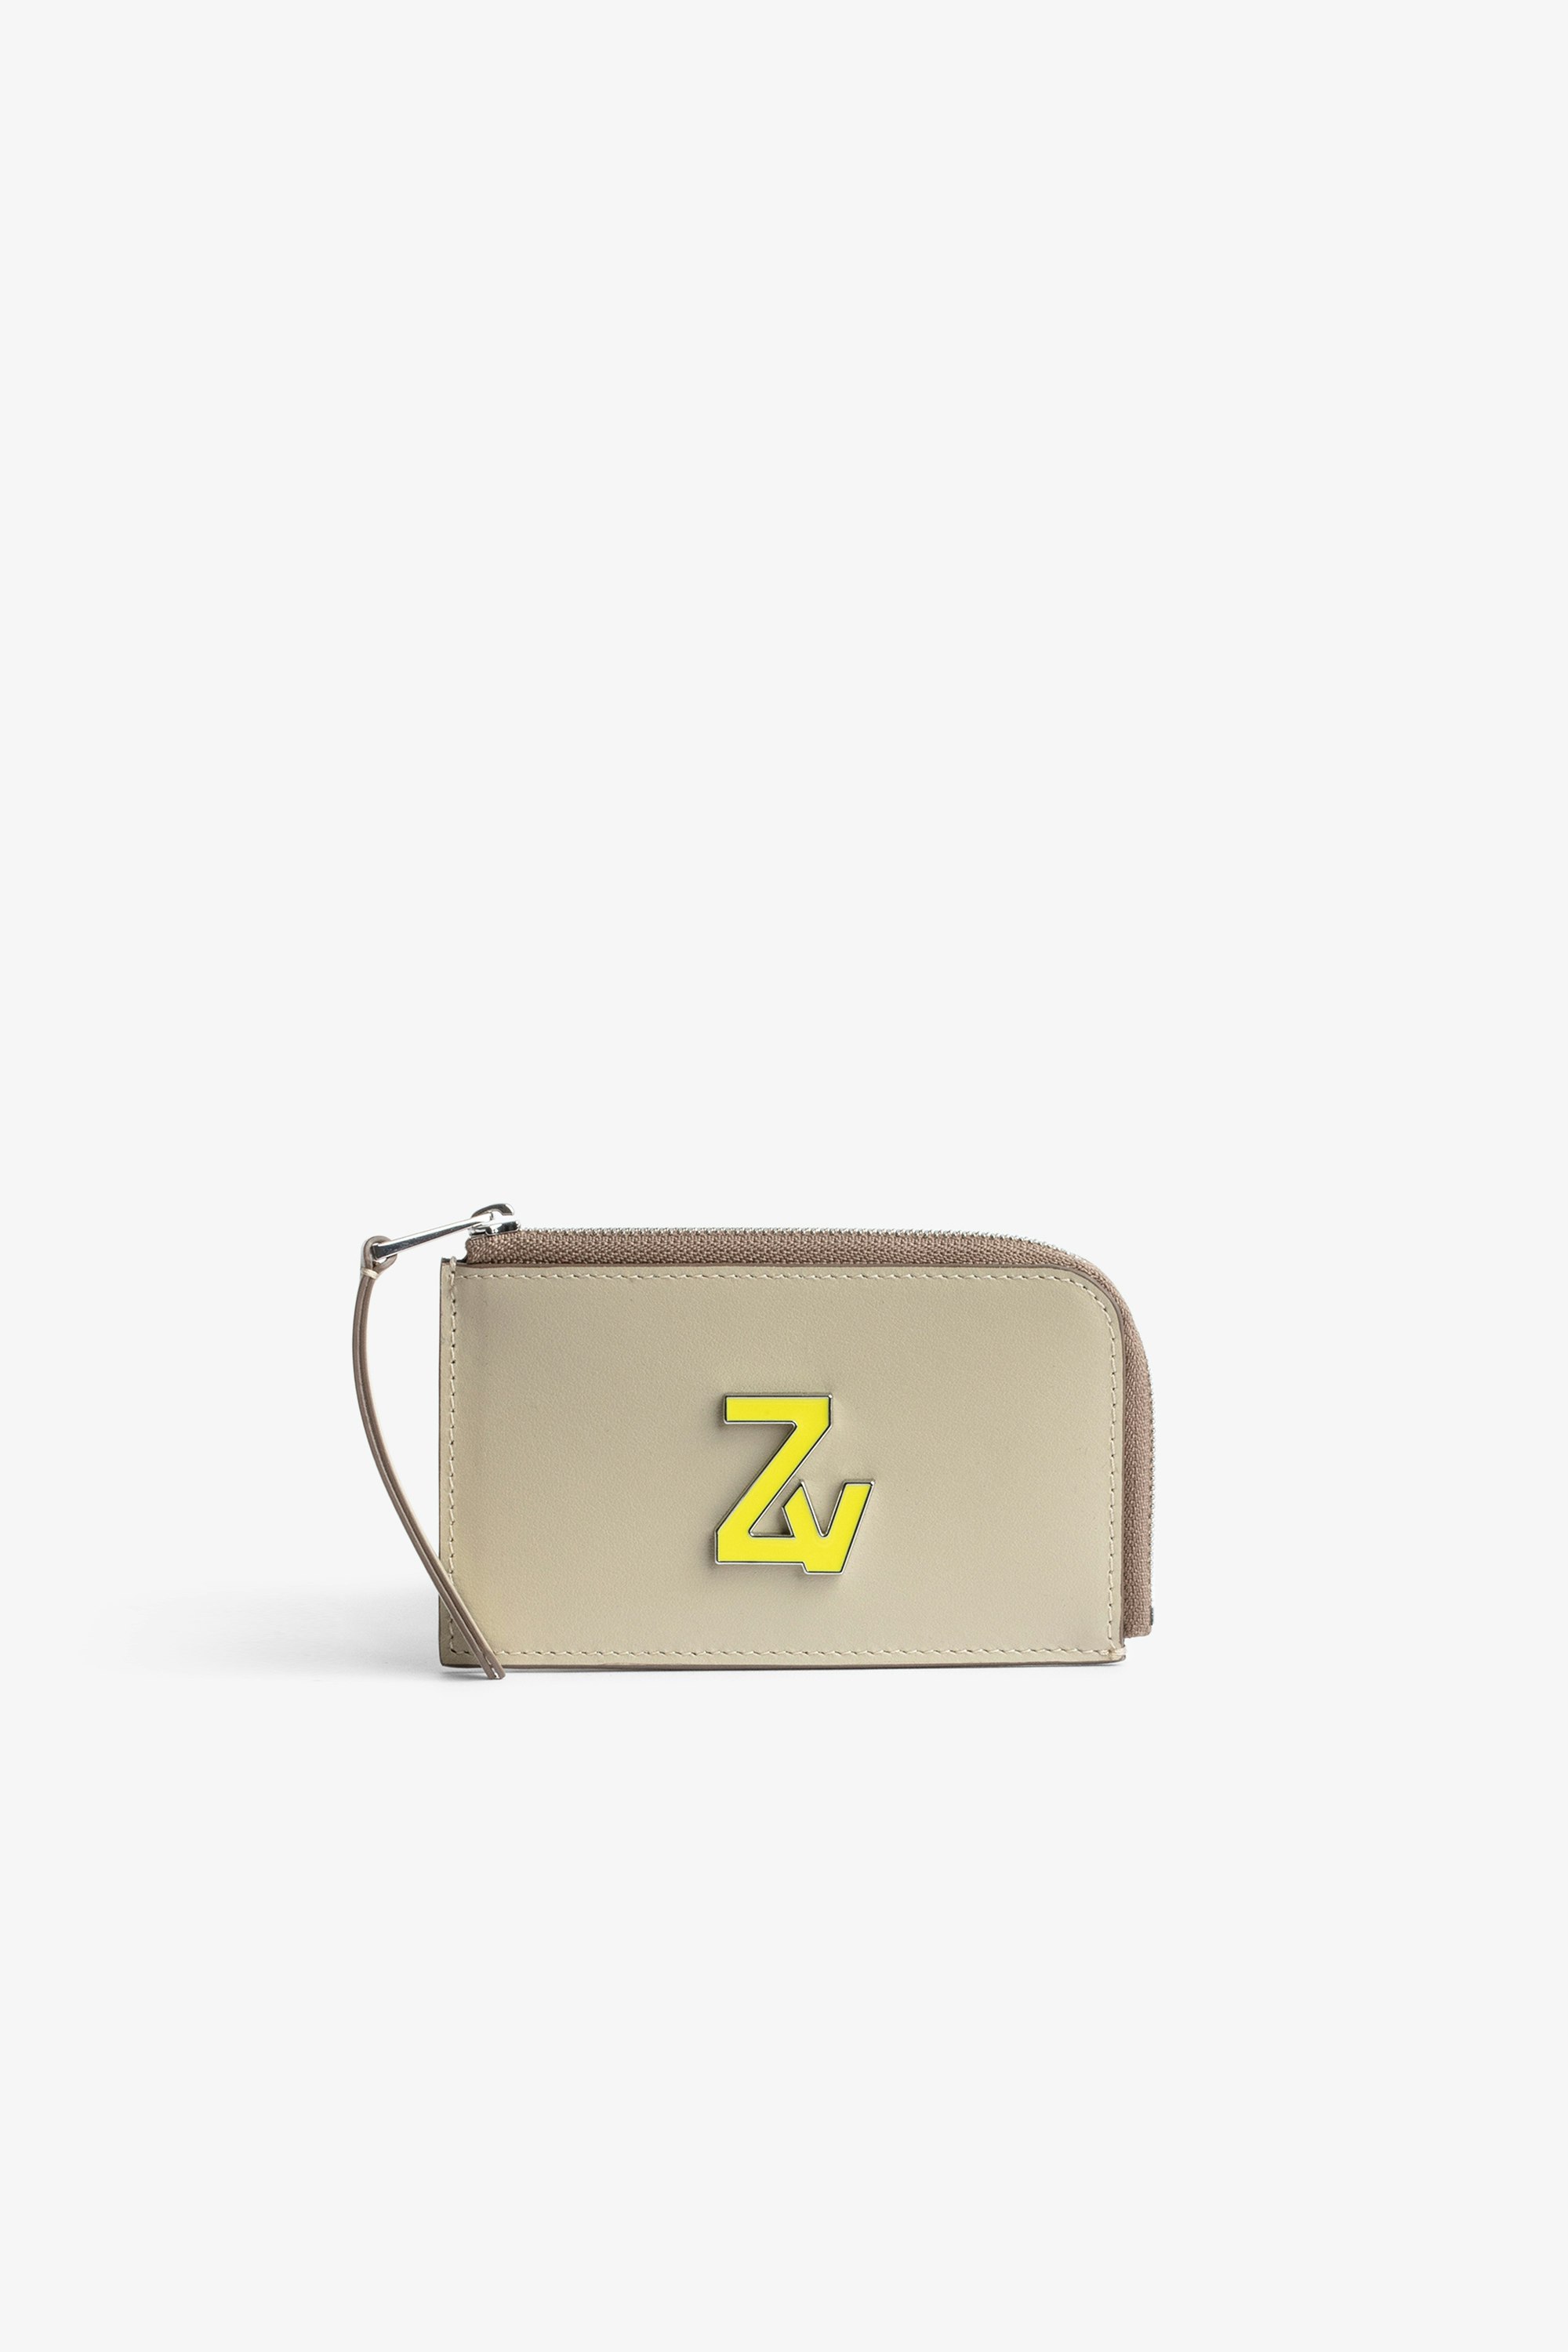 ZV Initiale Le Medium Monogram Card Holder Women’s zipped card holder in beige smooth leather with yellow ZV